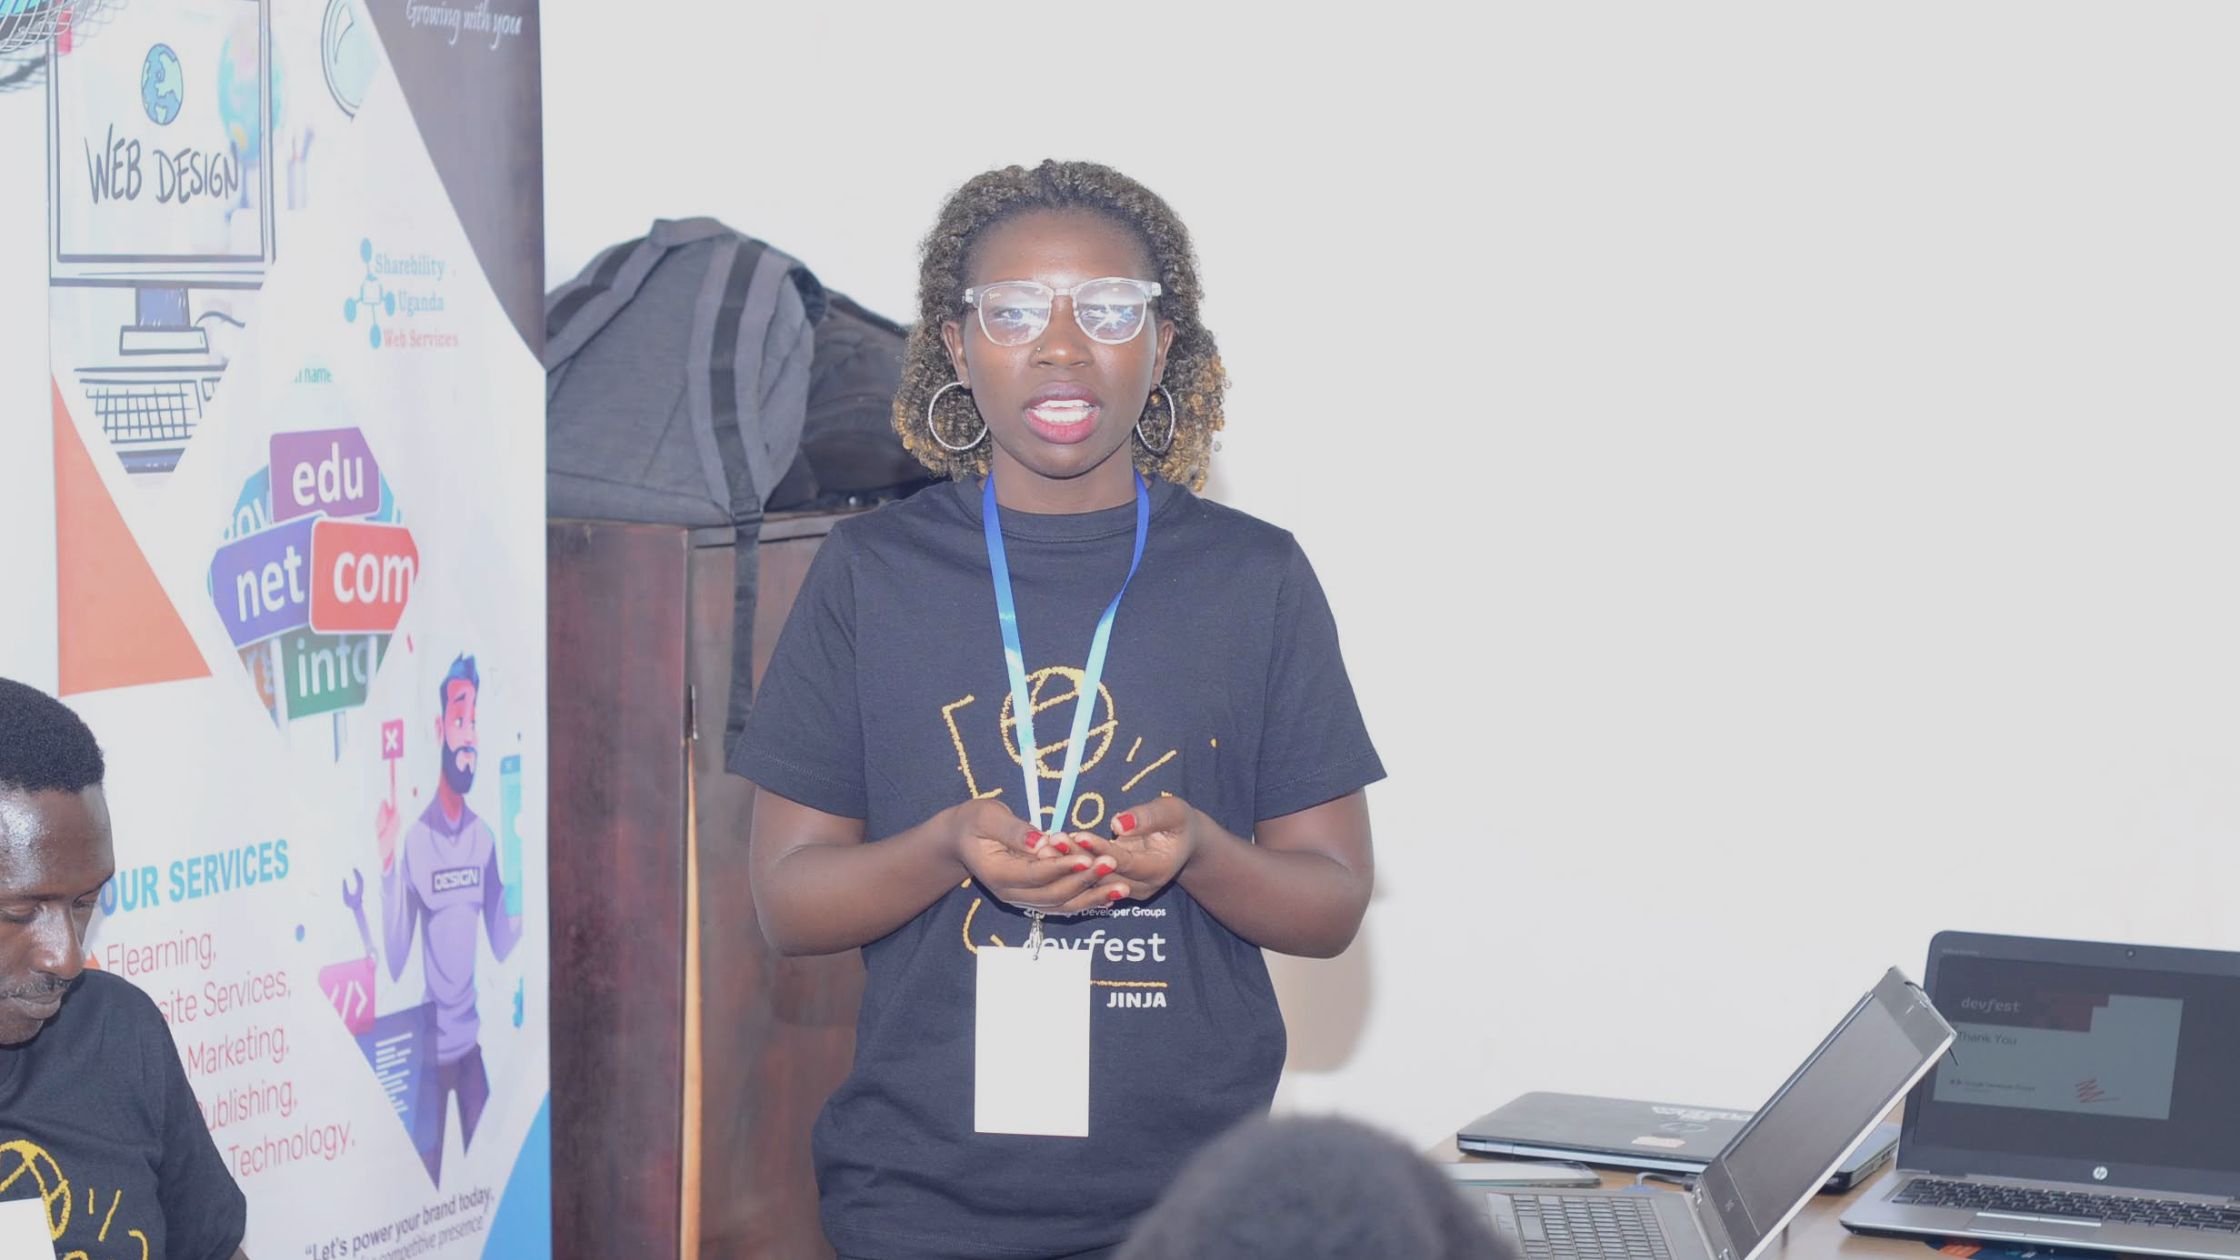 How to List your Business on Google My Business – DevFest Jinja 2023